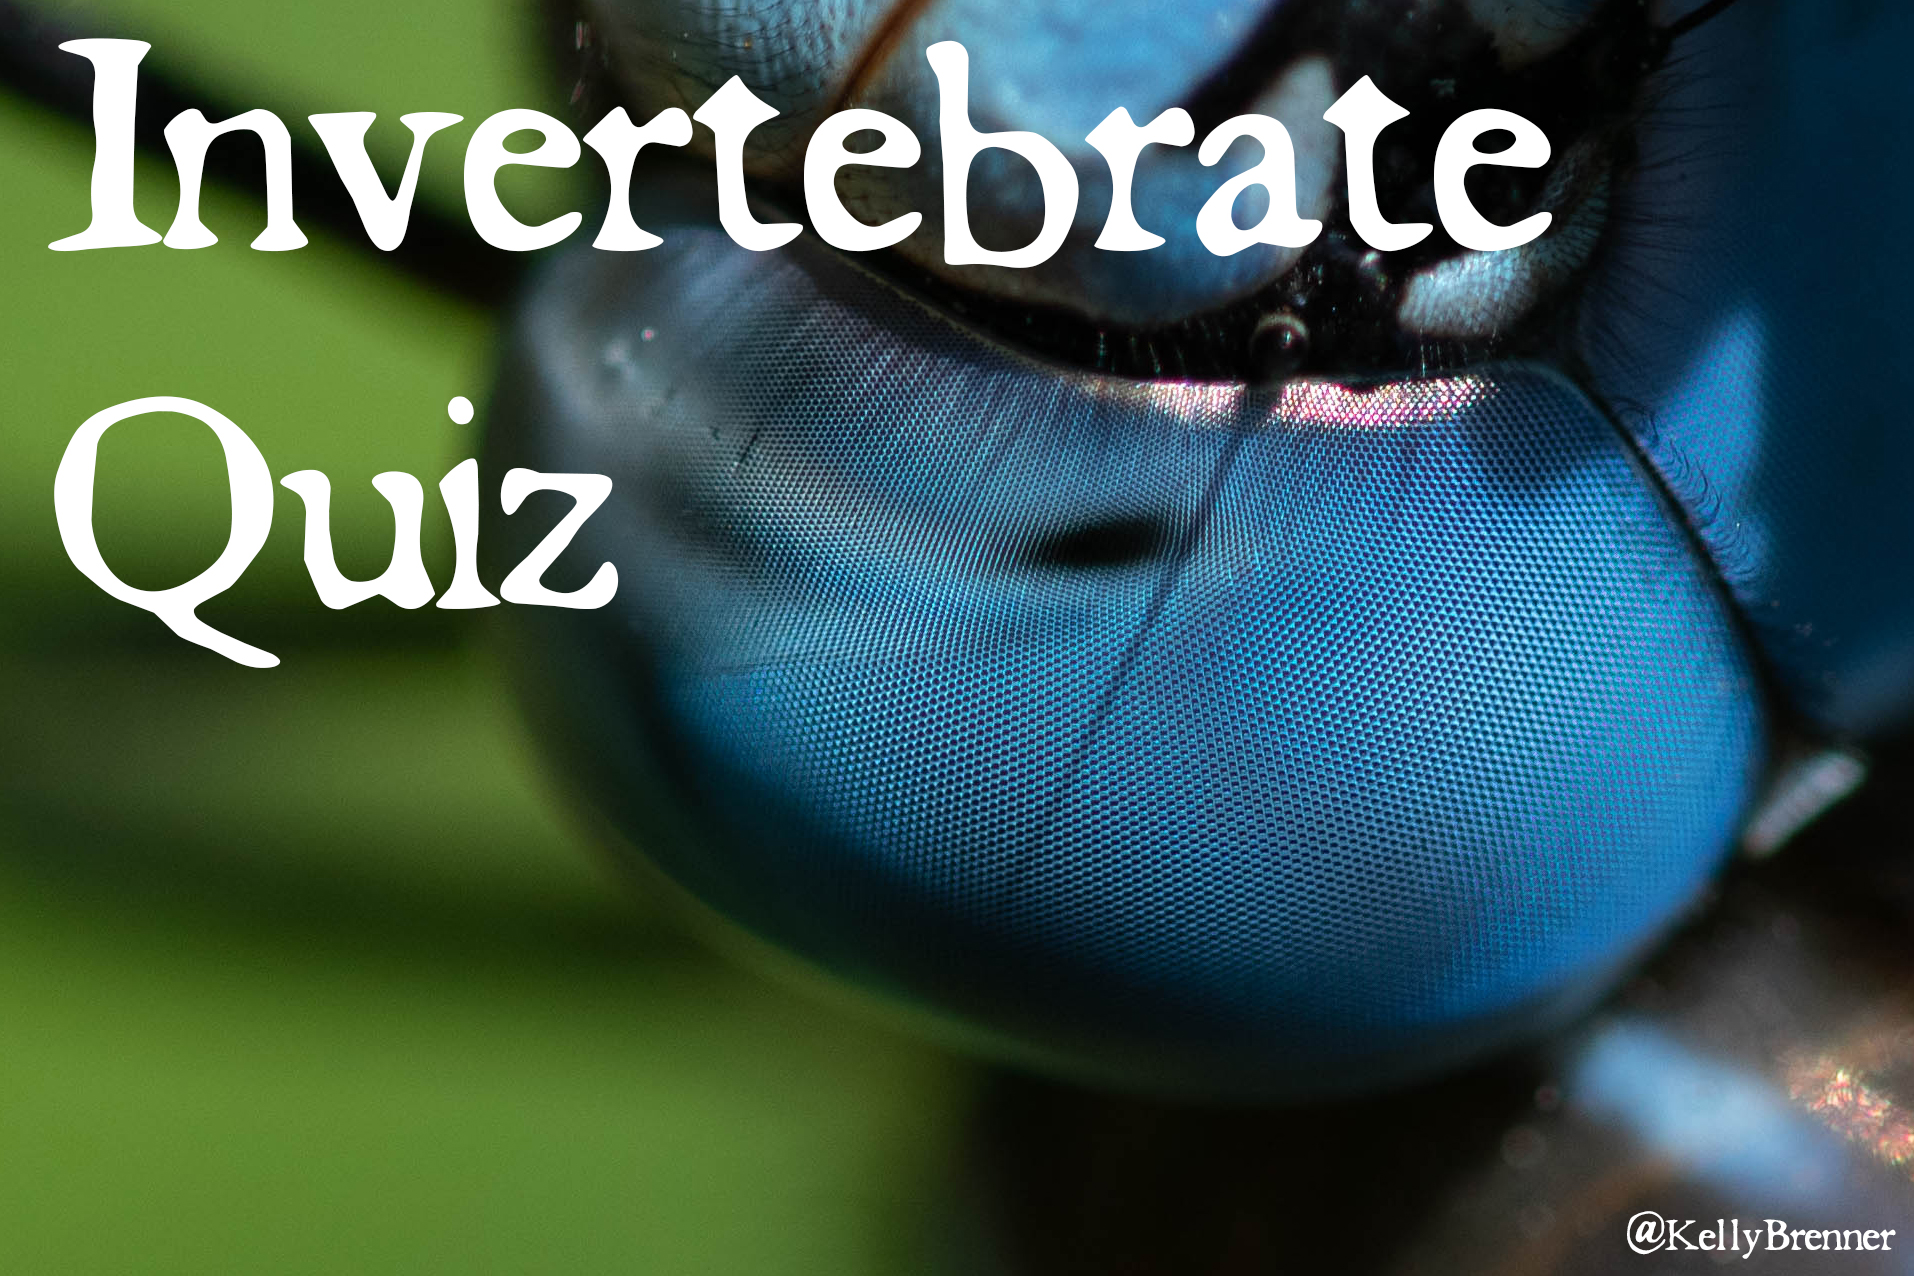 Invertebrate Quiz: Here’s Looking at You